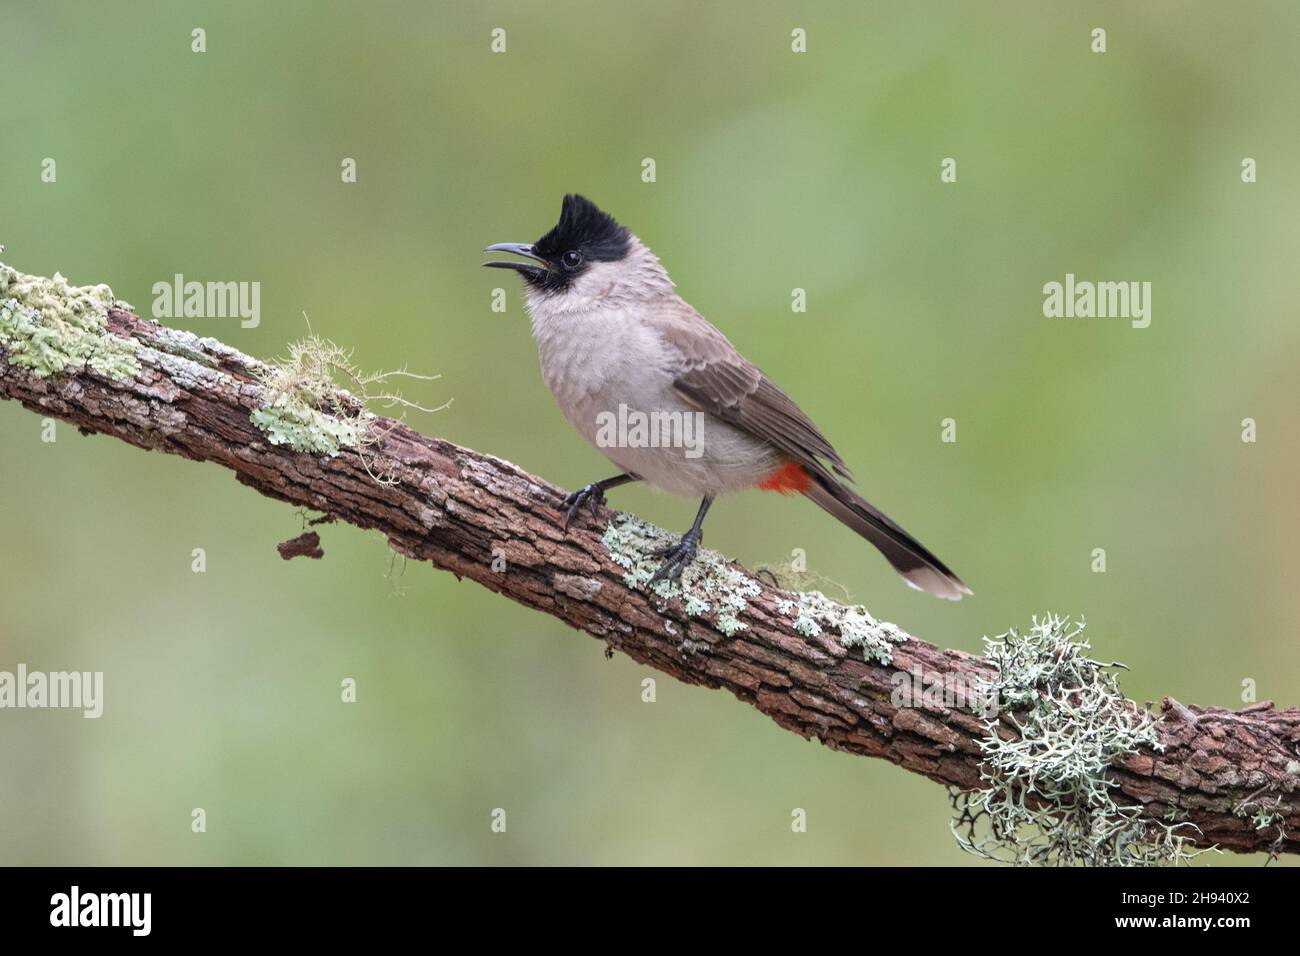 The sooty-headed bulbul (Pycnonotus aurigaster) is a species of songbird in the Bulbul family, Pycnonotidae. It is found in south-eastern Asia. Its na Stock Photo